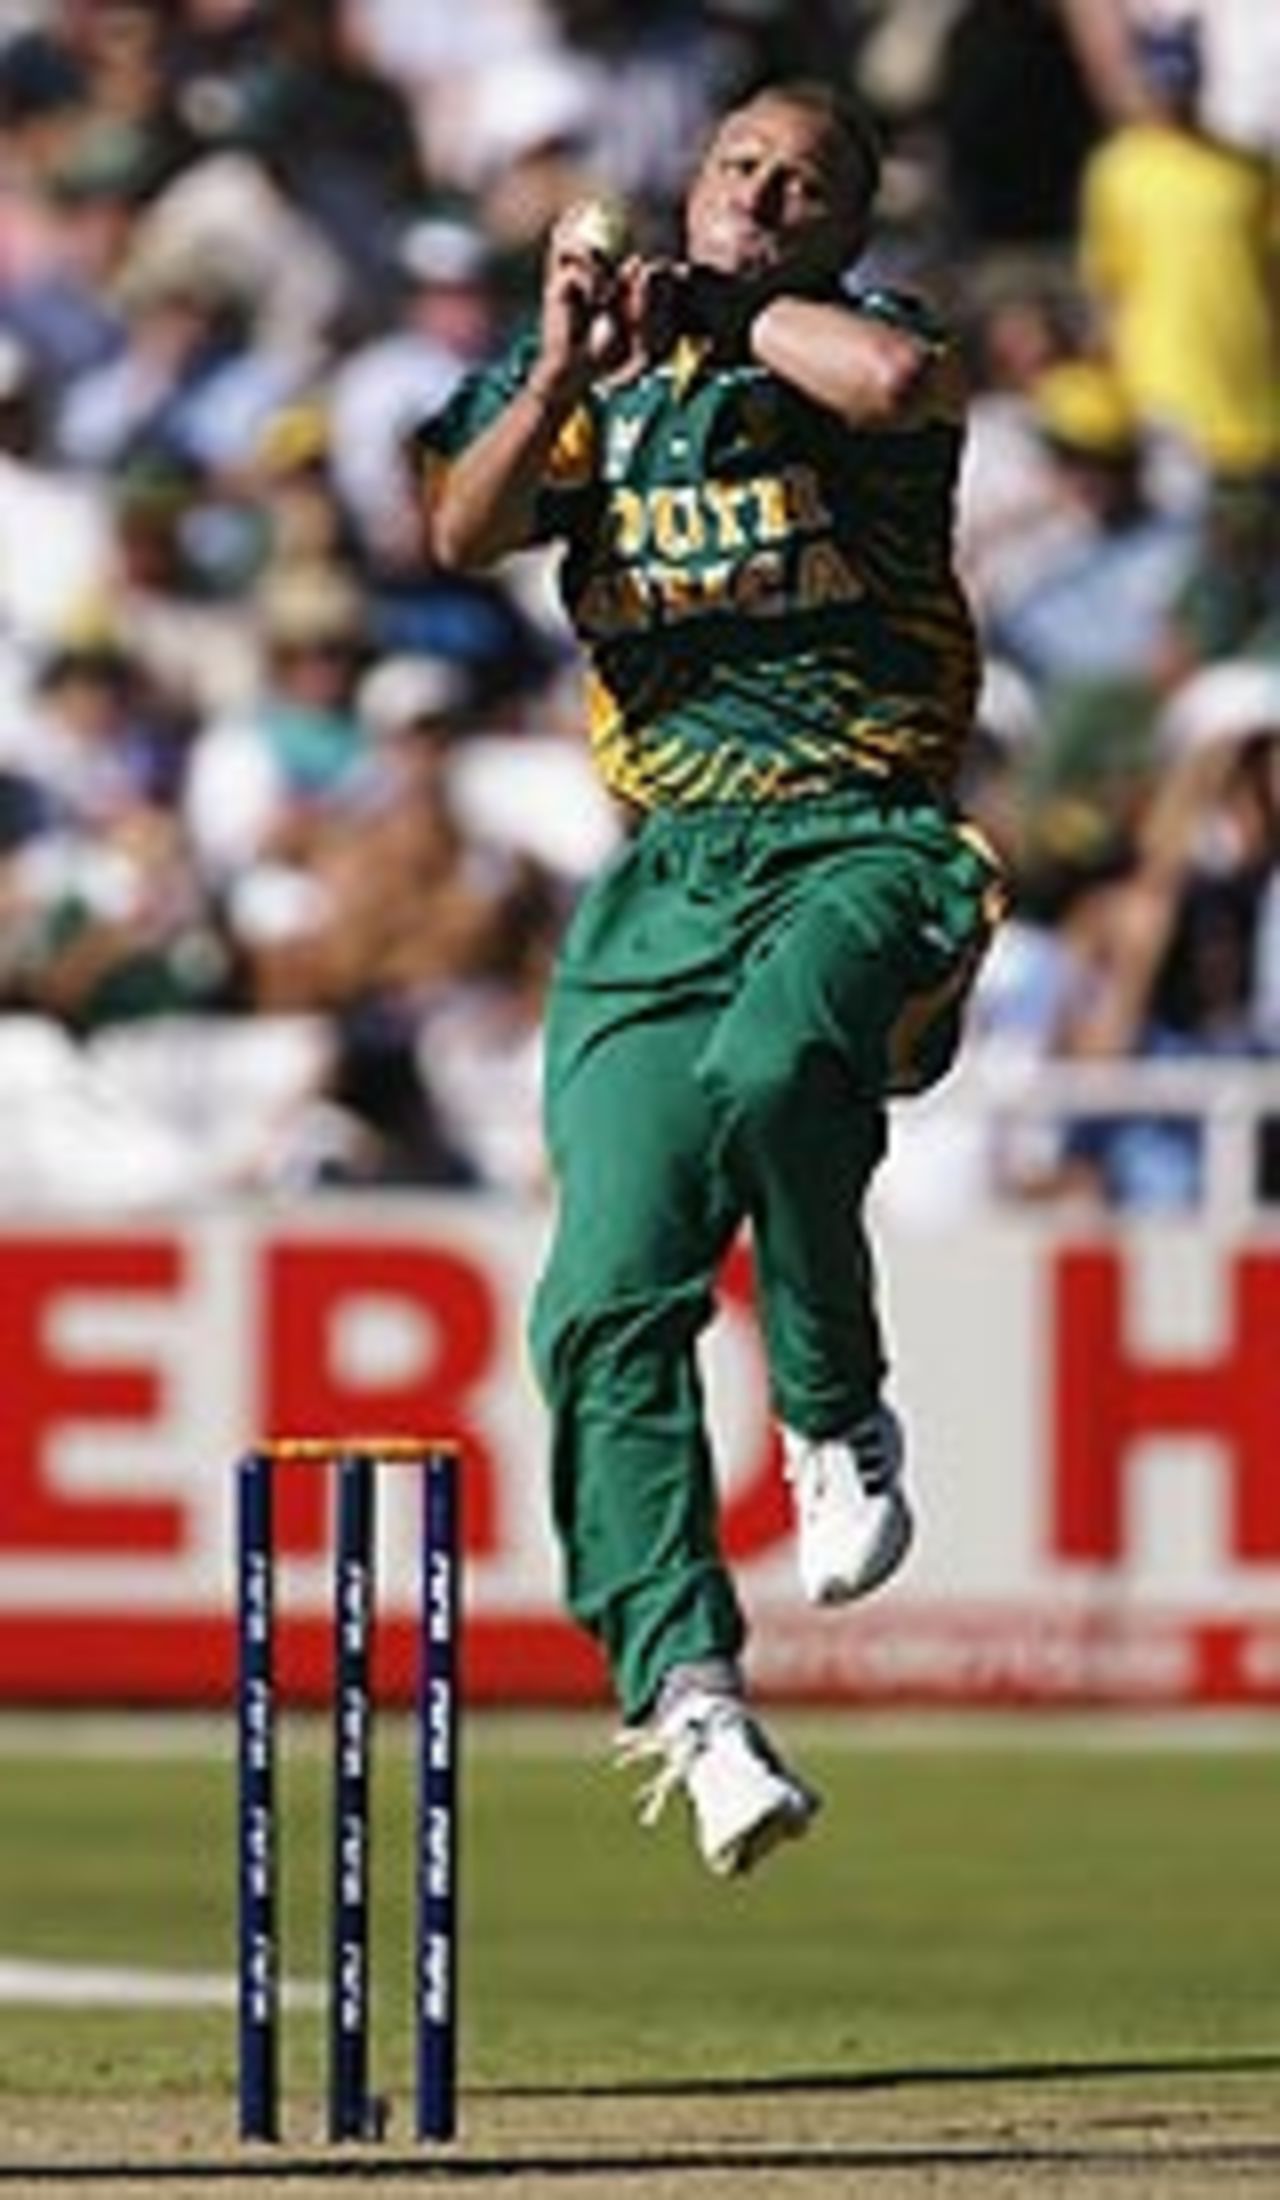 Allan Donald bowling during World Cup game against West Indies, February 9, 2003